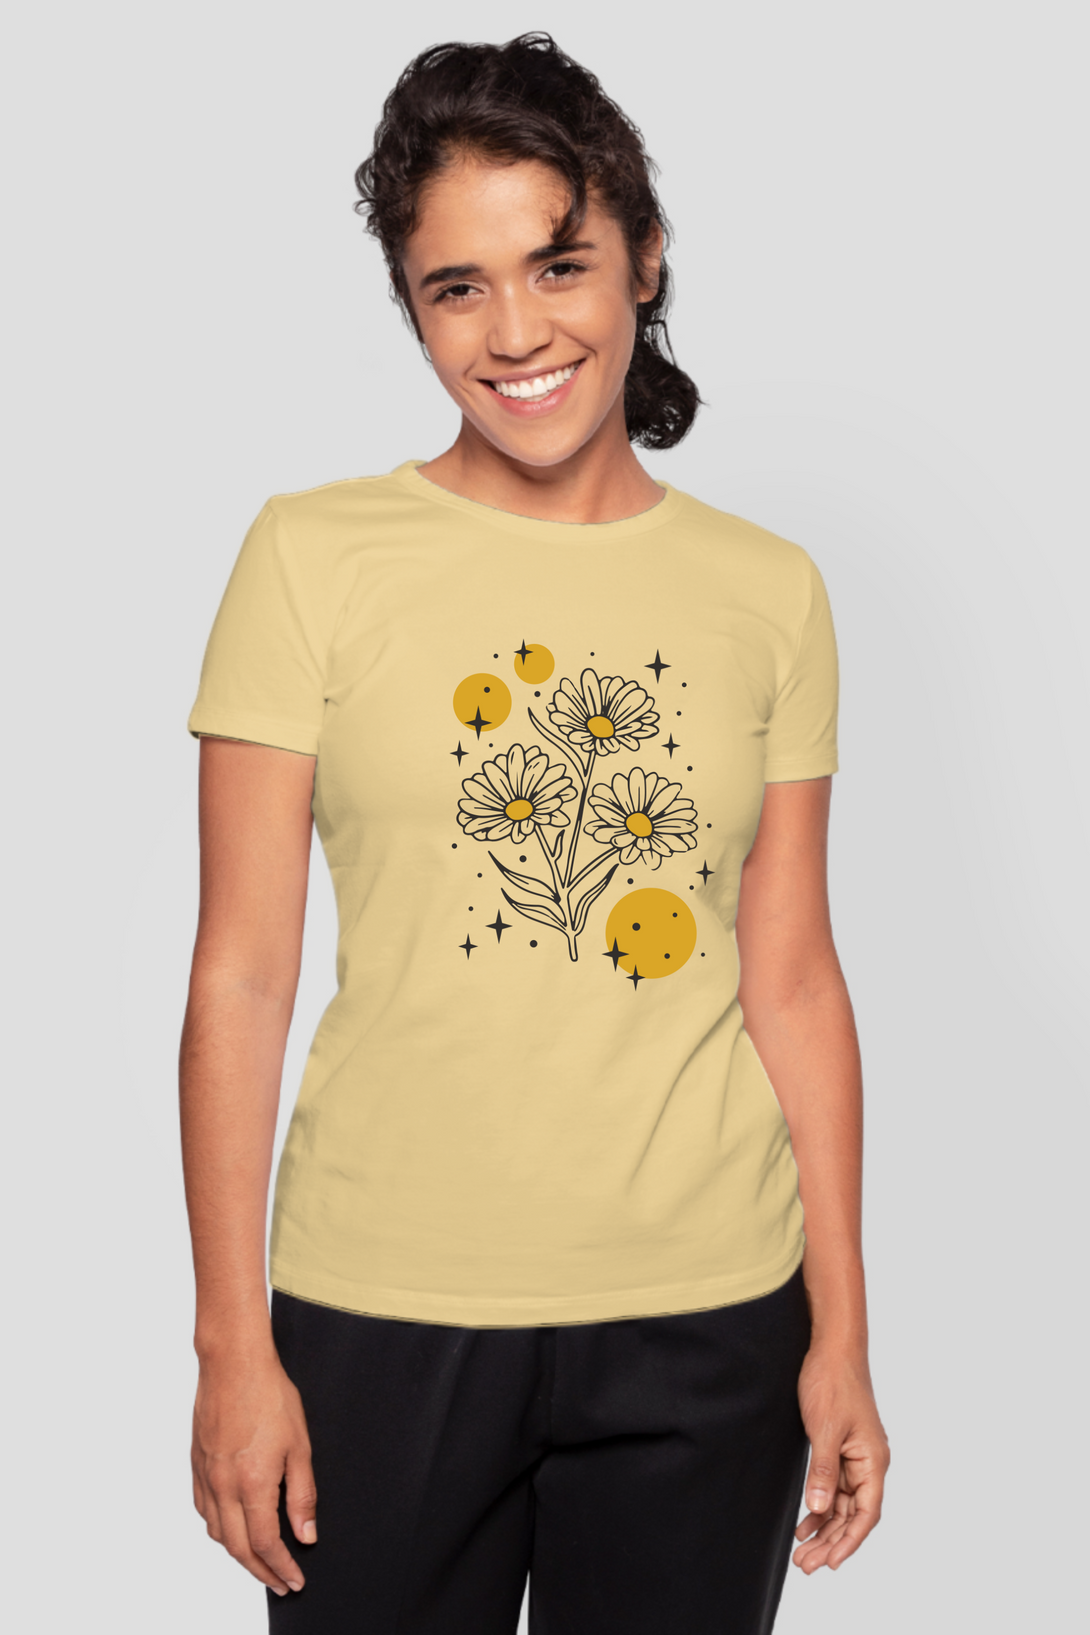 Sparkling Flowers Printed T-Shirt For Women - WowWaves - 10